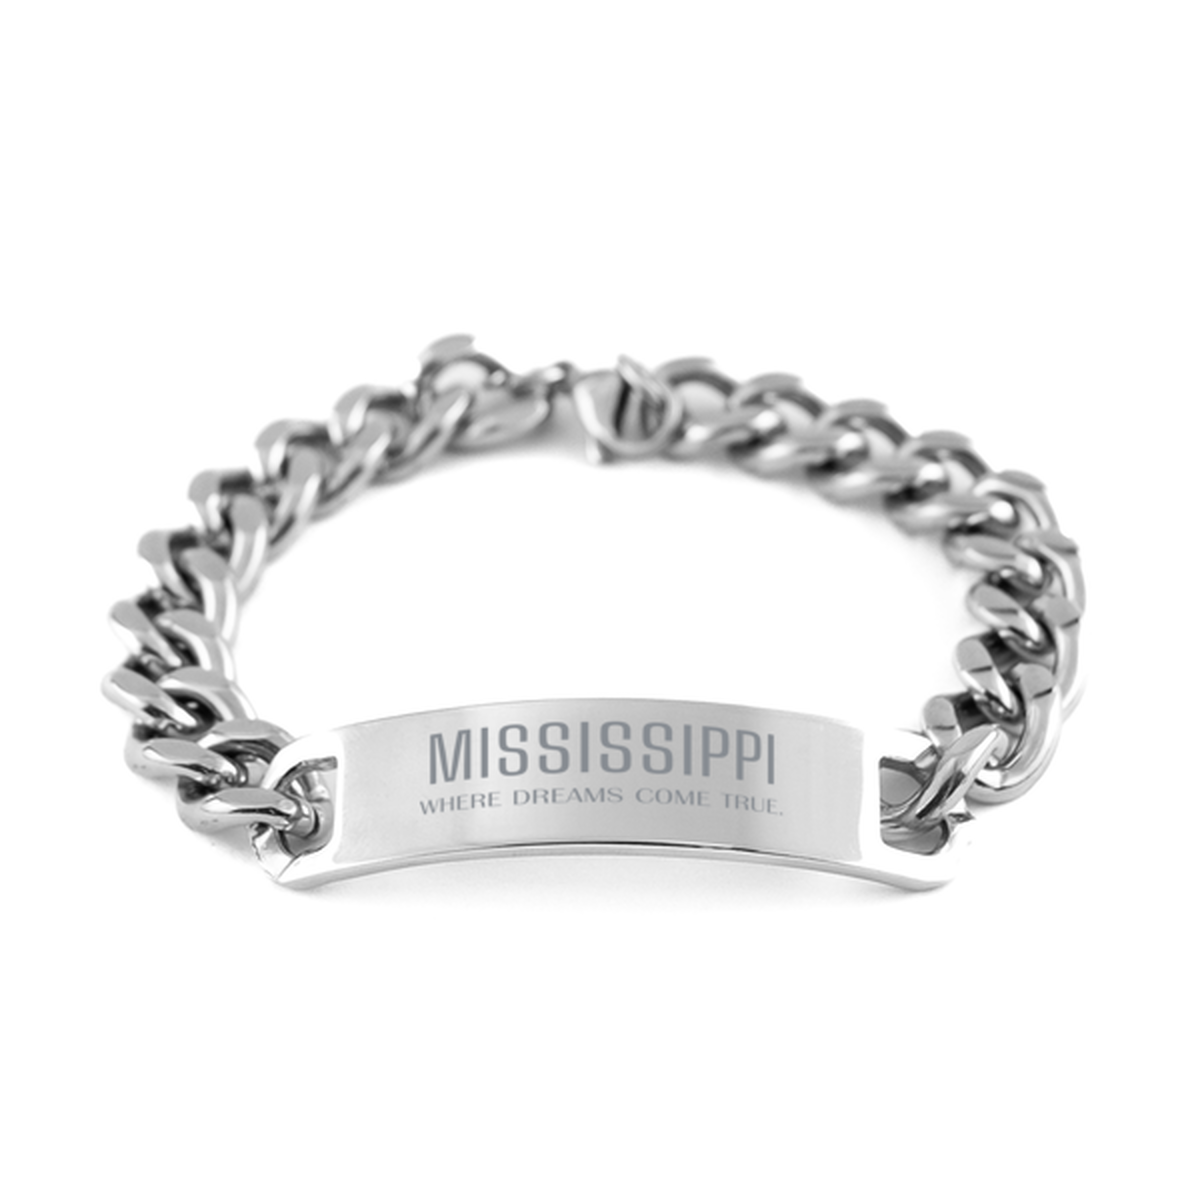 Love Mississippi State Cuban Chain Stainless Steel Bracelet, Mississippi Where dreams come true, Birthday Inspirational Gifts For Mississippi Men, Women, Friends